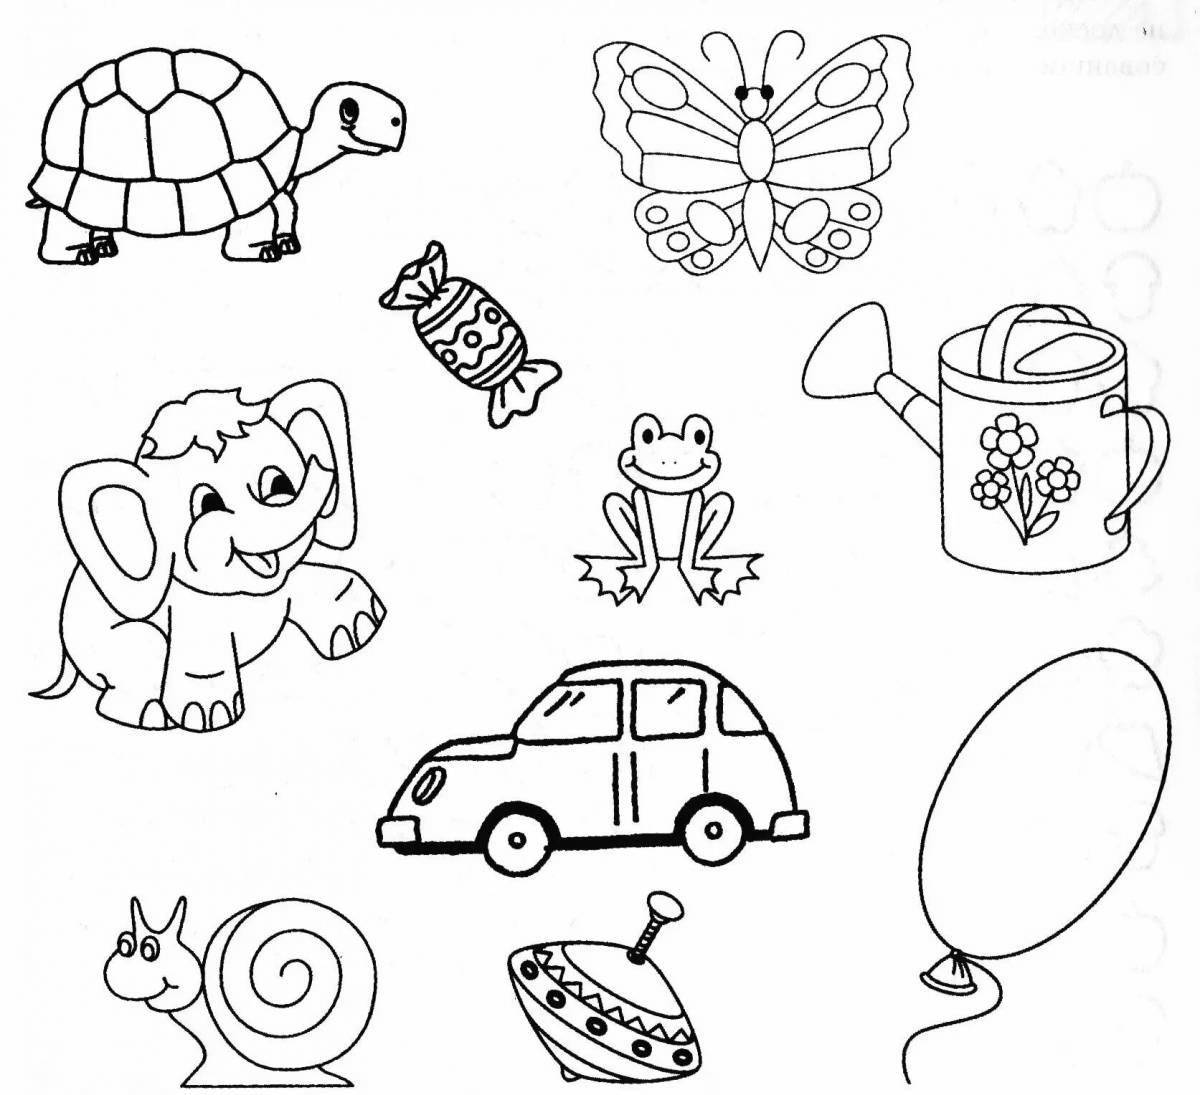 Awesome wildlife coloring page